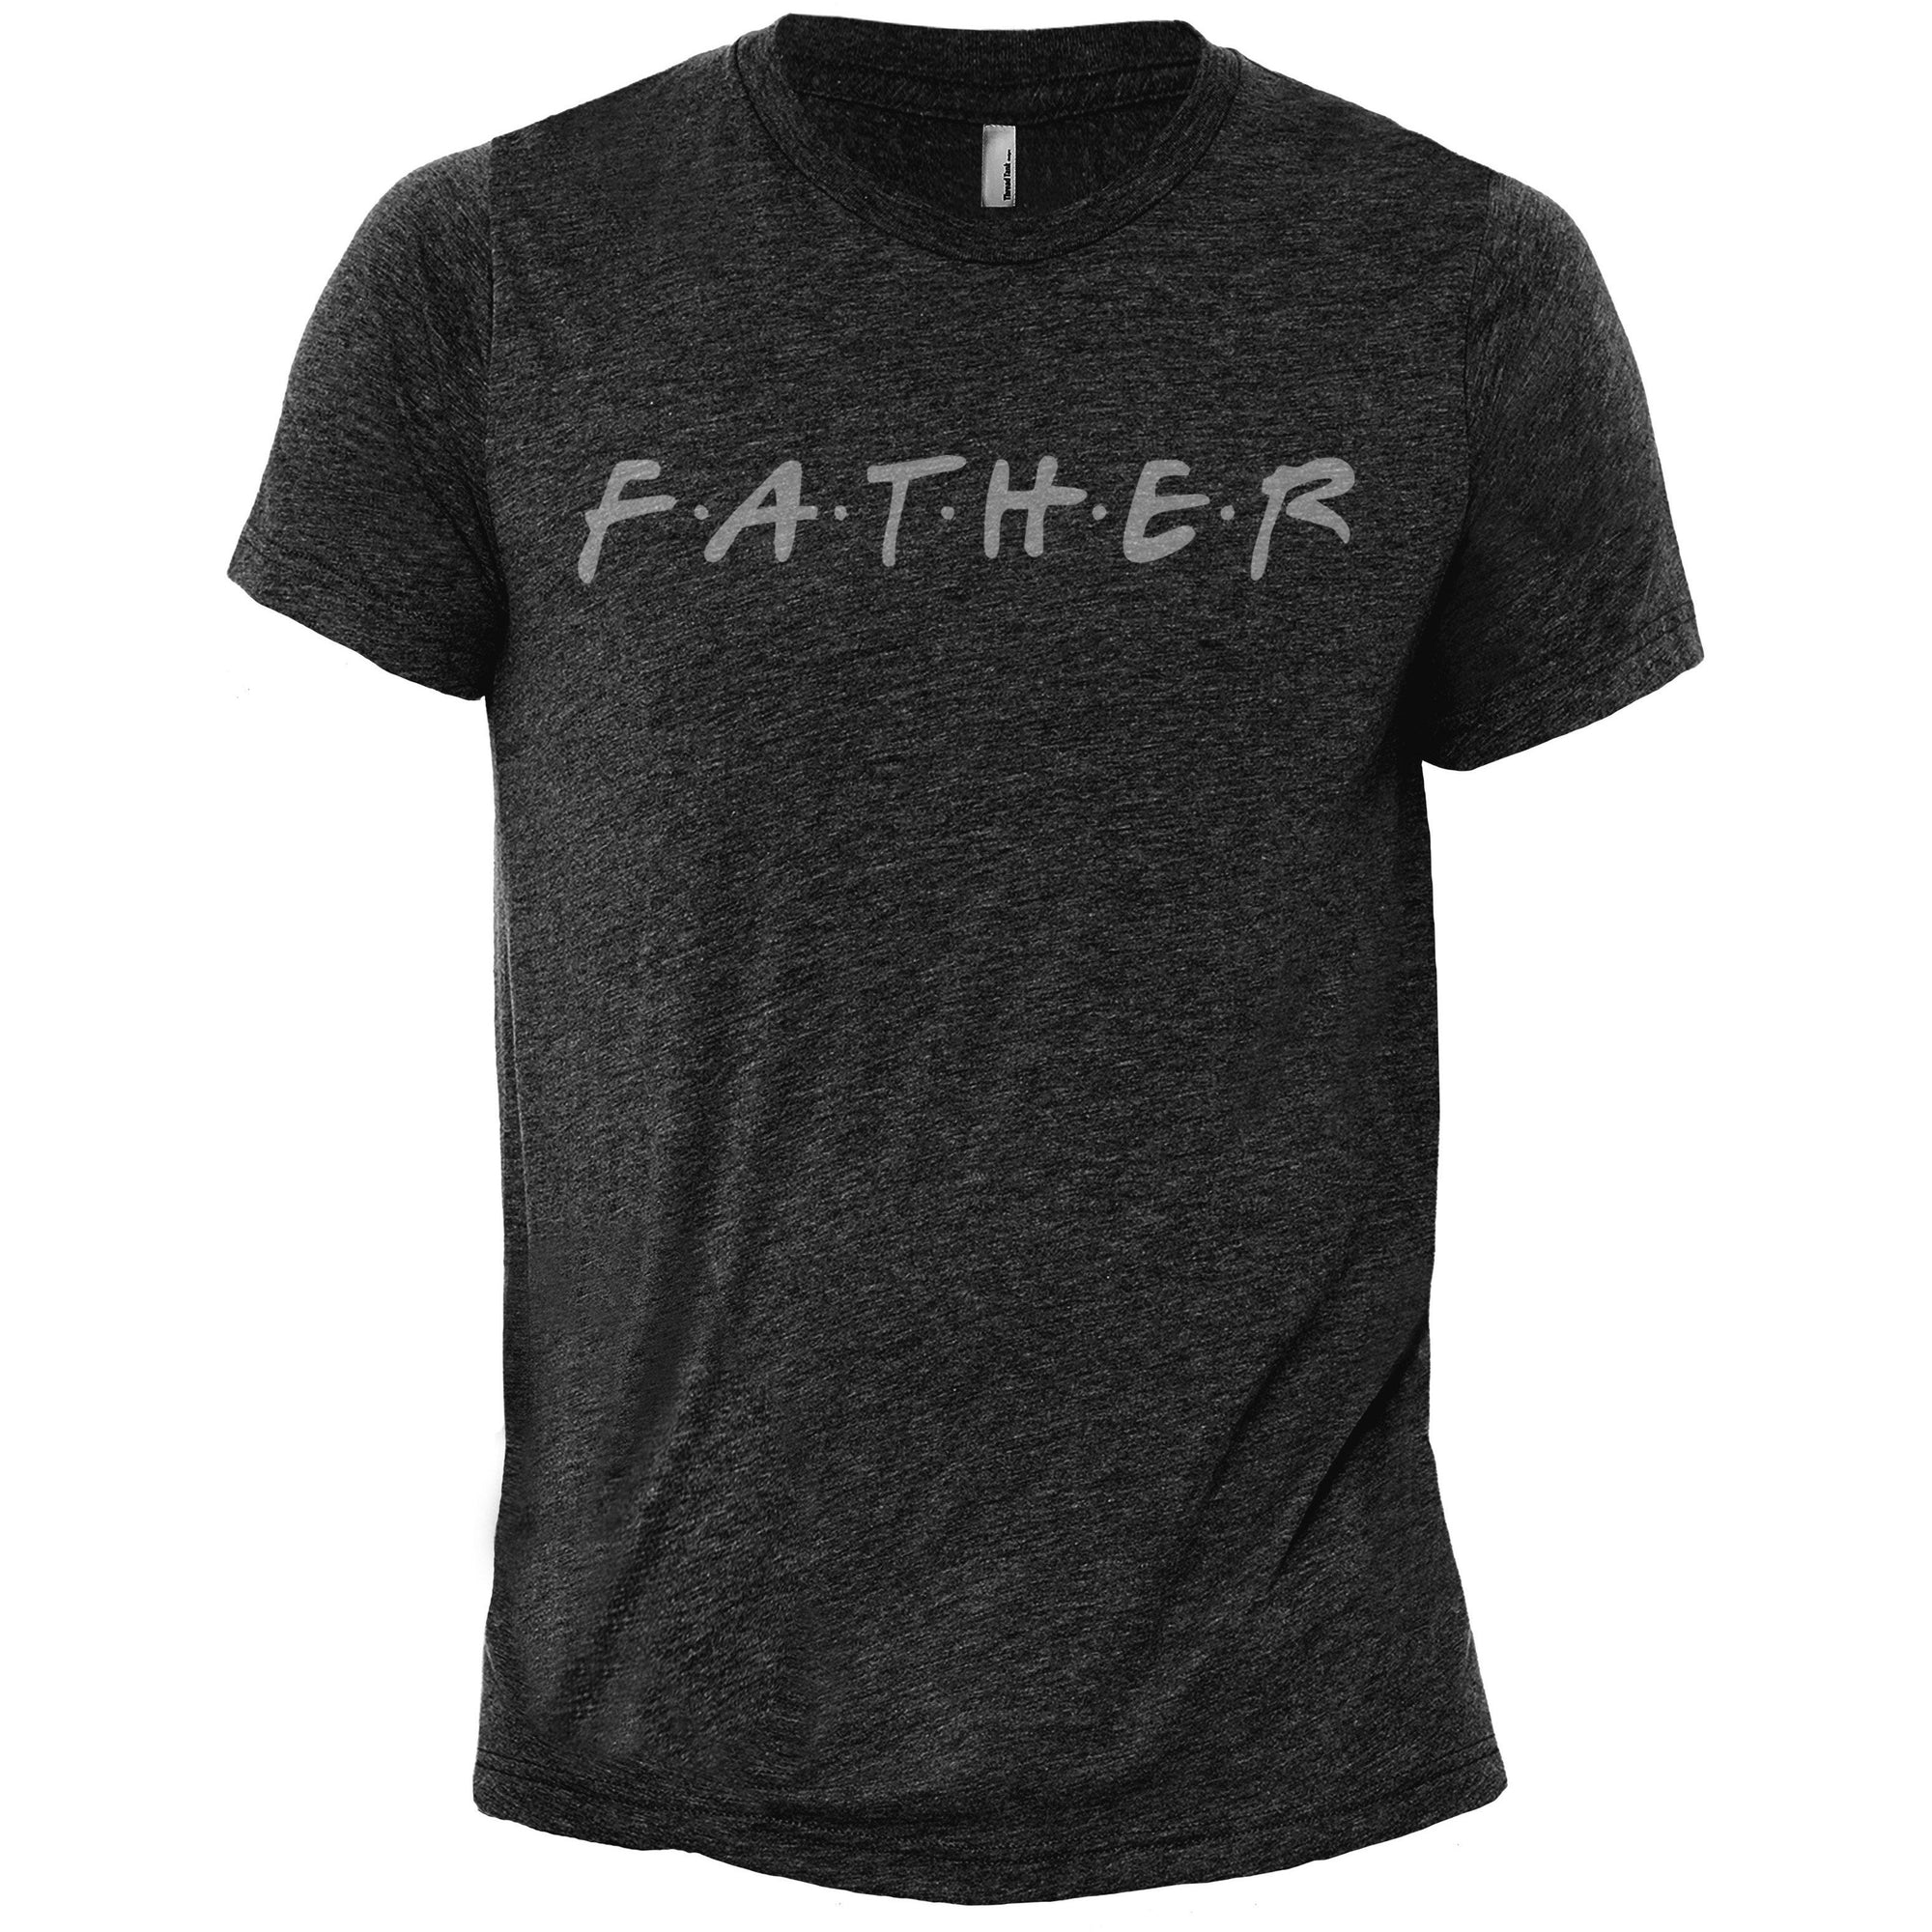 Father Friends Heather Grey Printed Graphic Men's Crew T-Shirt Tee